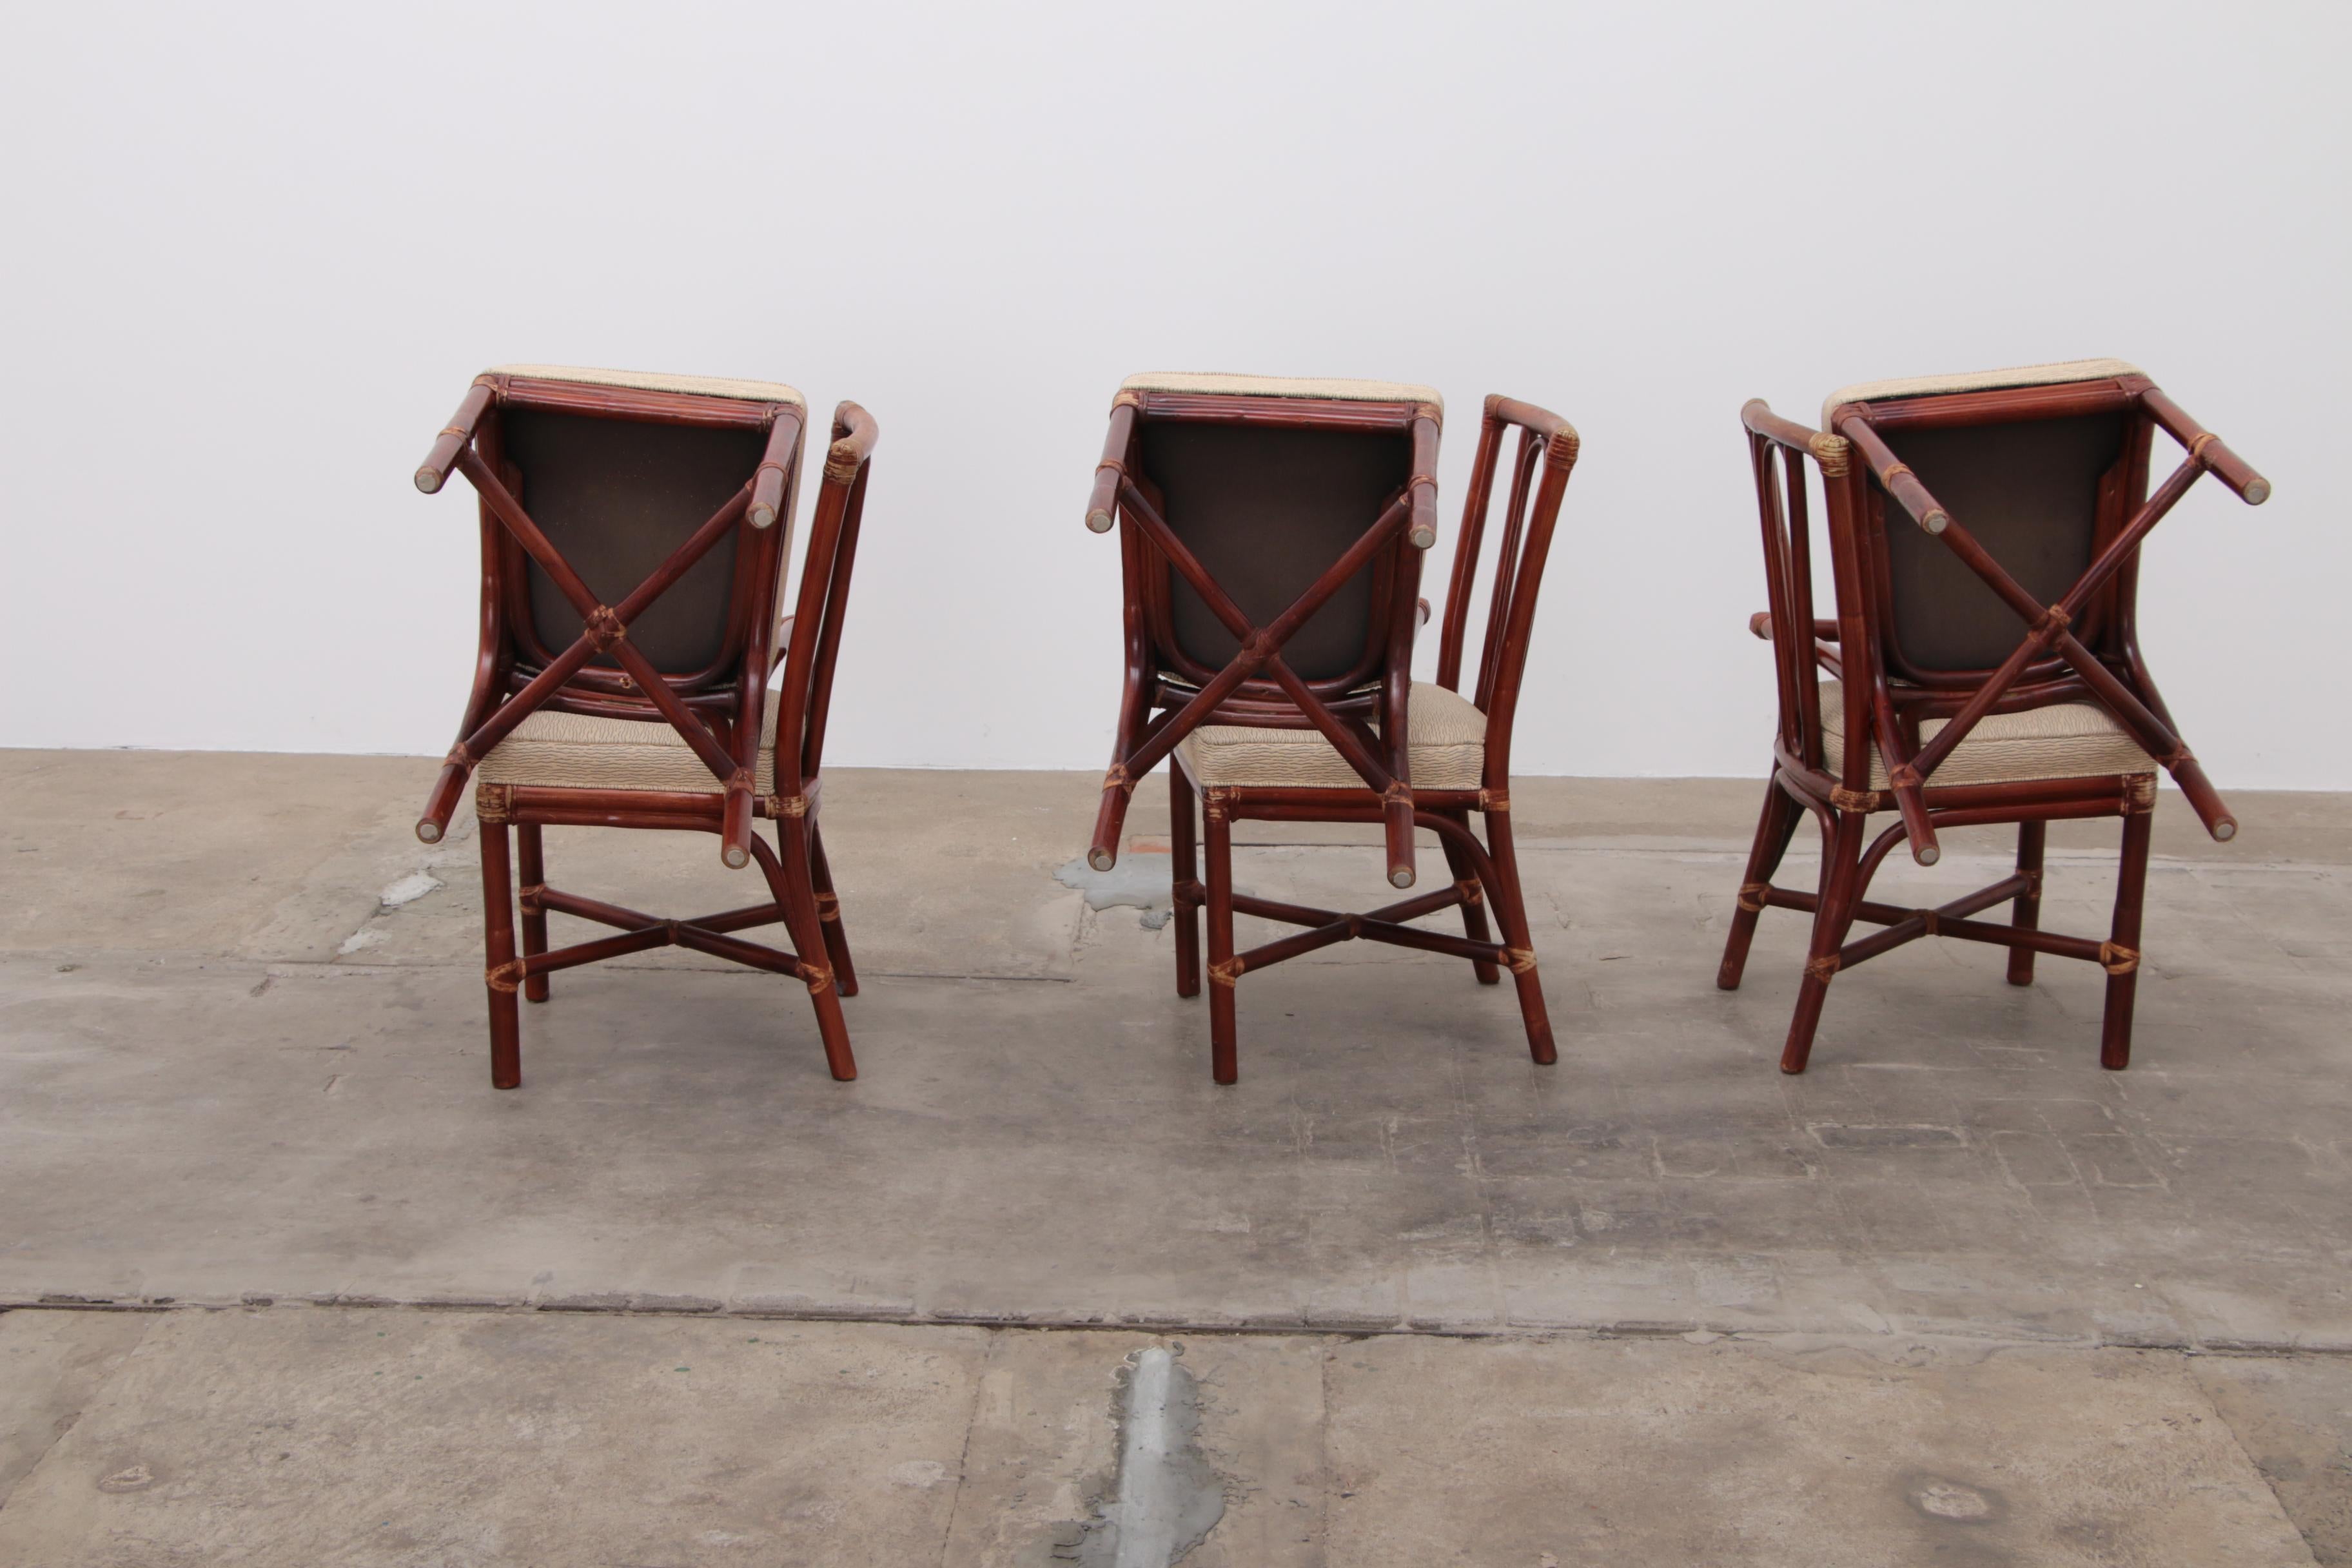 Late 20th Century Set of rattan dining room chairs in the organic modern Californian coastal style